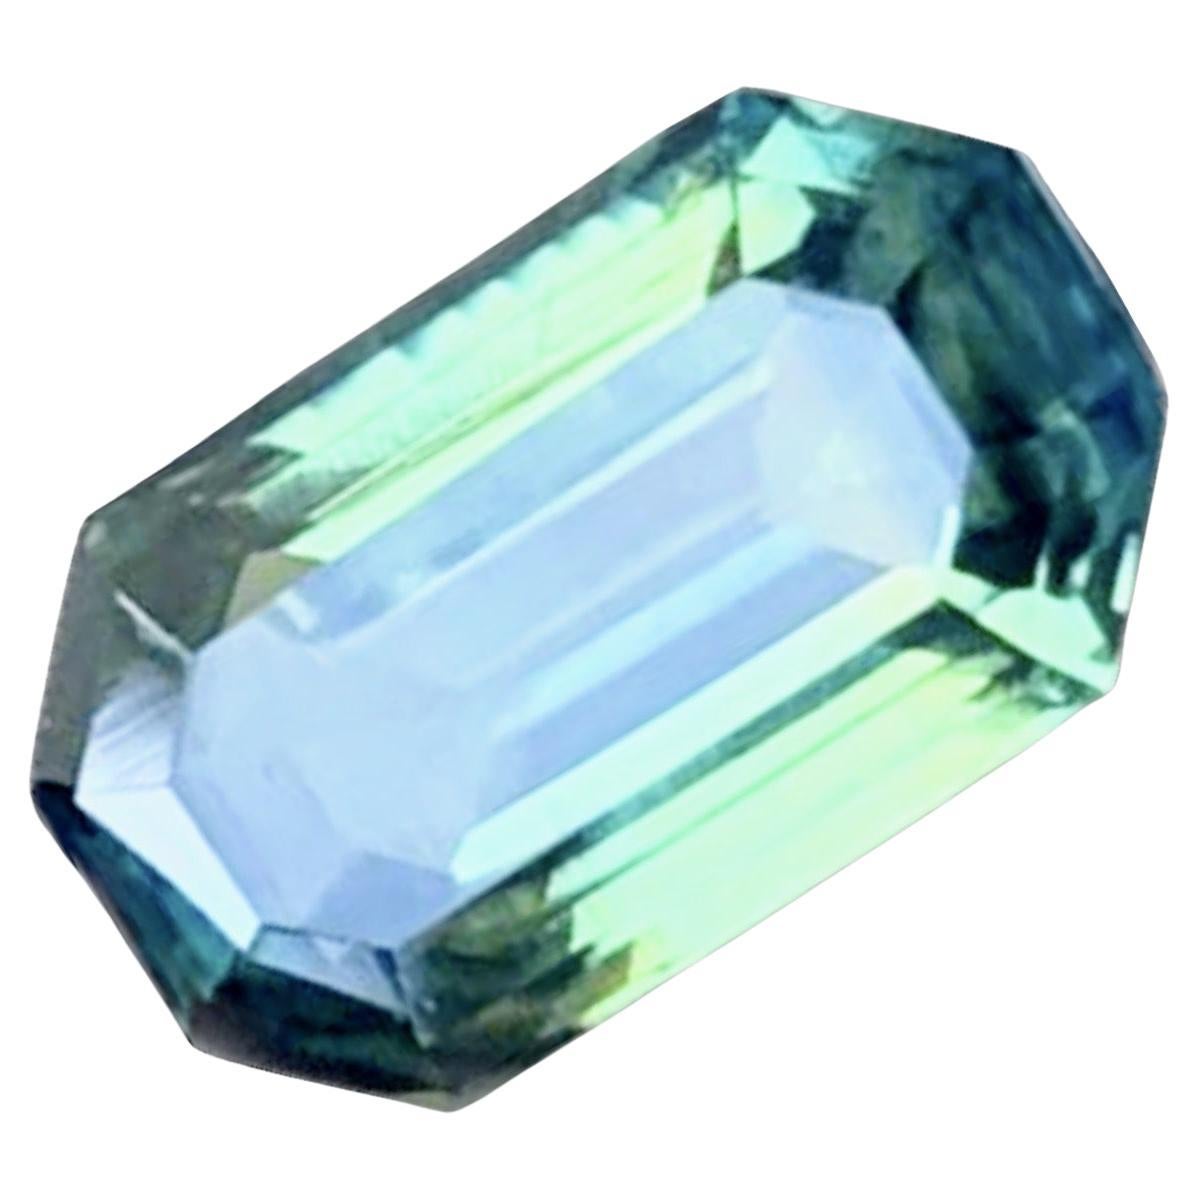 Artisan 1.8ct Emerald Cut LOUPE CLEAN Natural TEAL BLUE SAPPHIRE Gemstone NO RESERVE For Sale